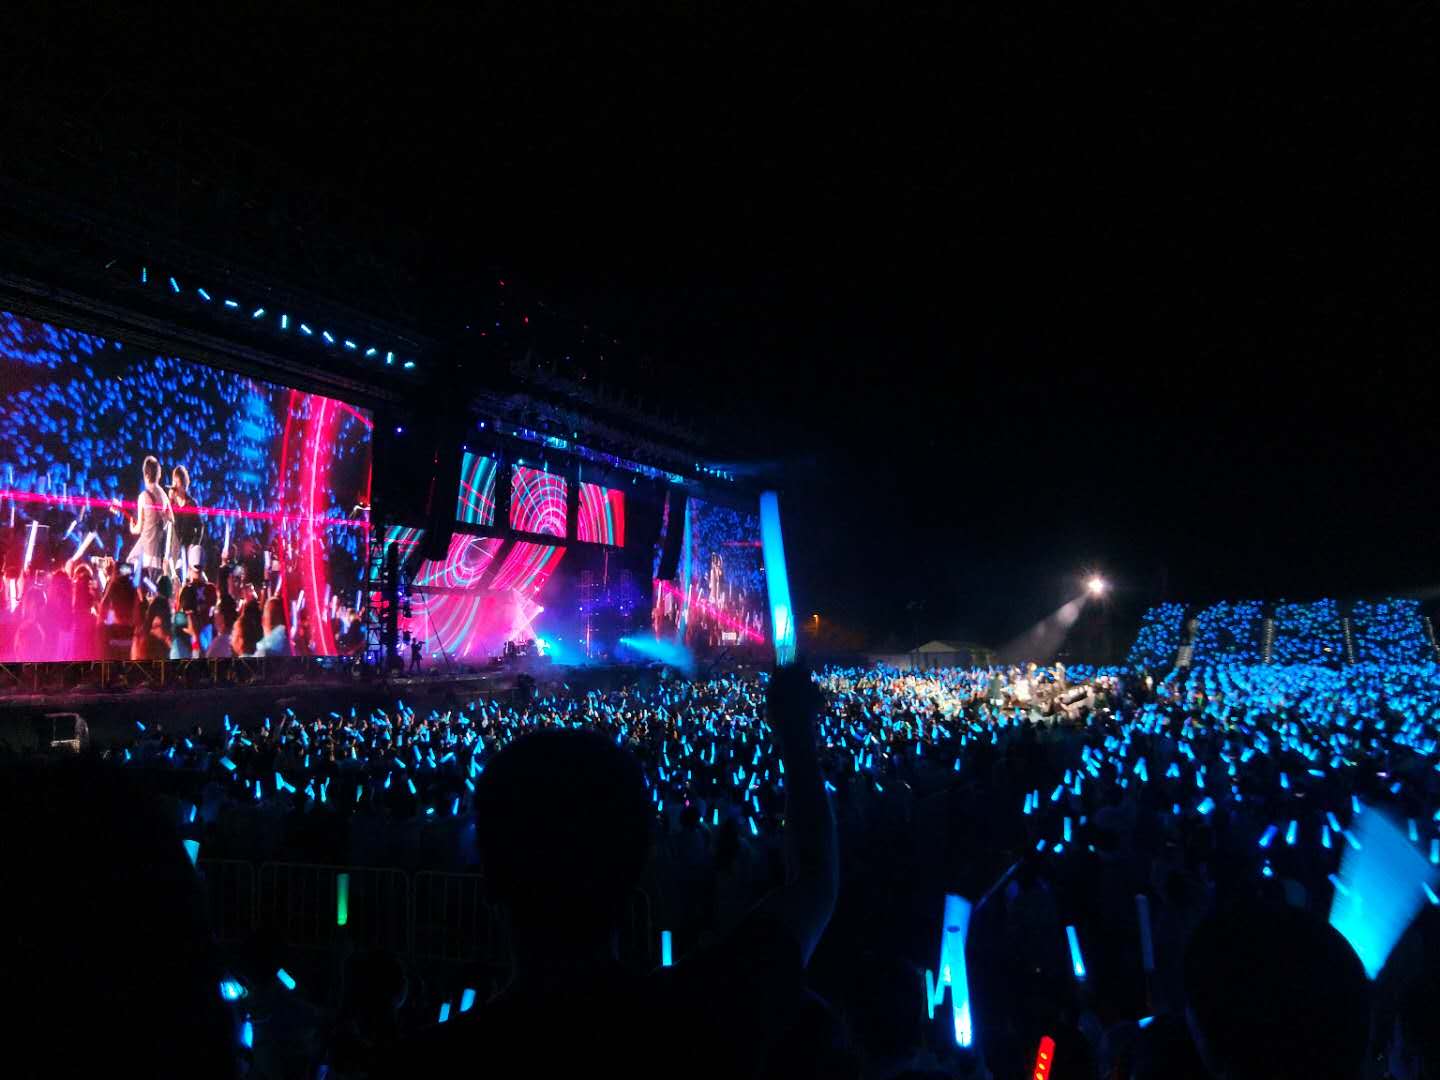 #Lightlink supported MAY DAY concert with 222sqm black transparent LED screen